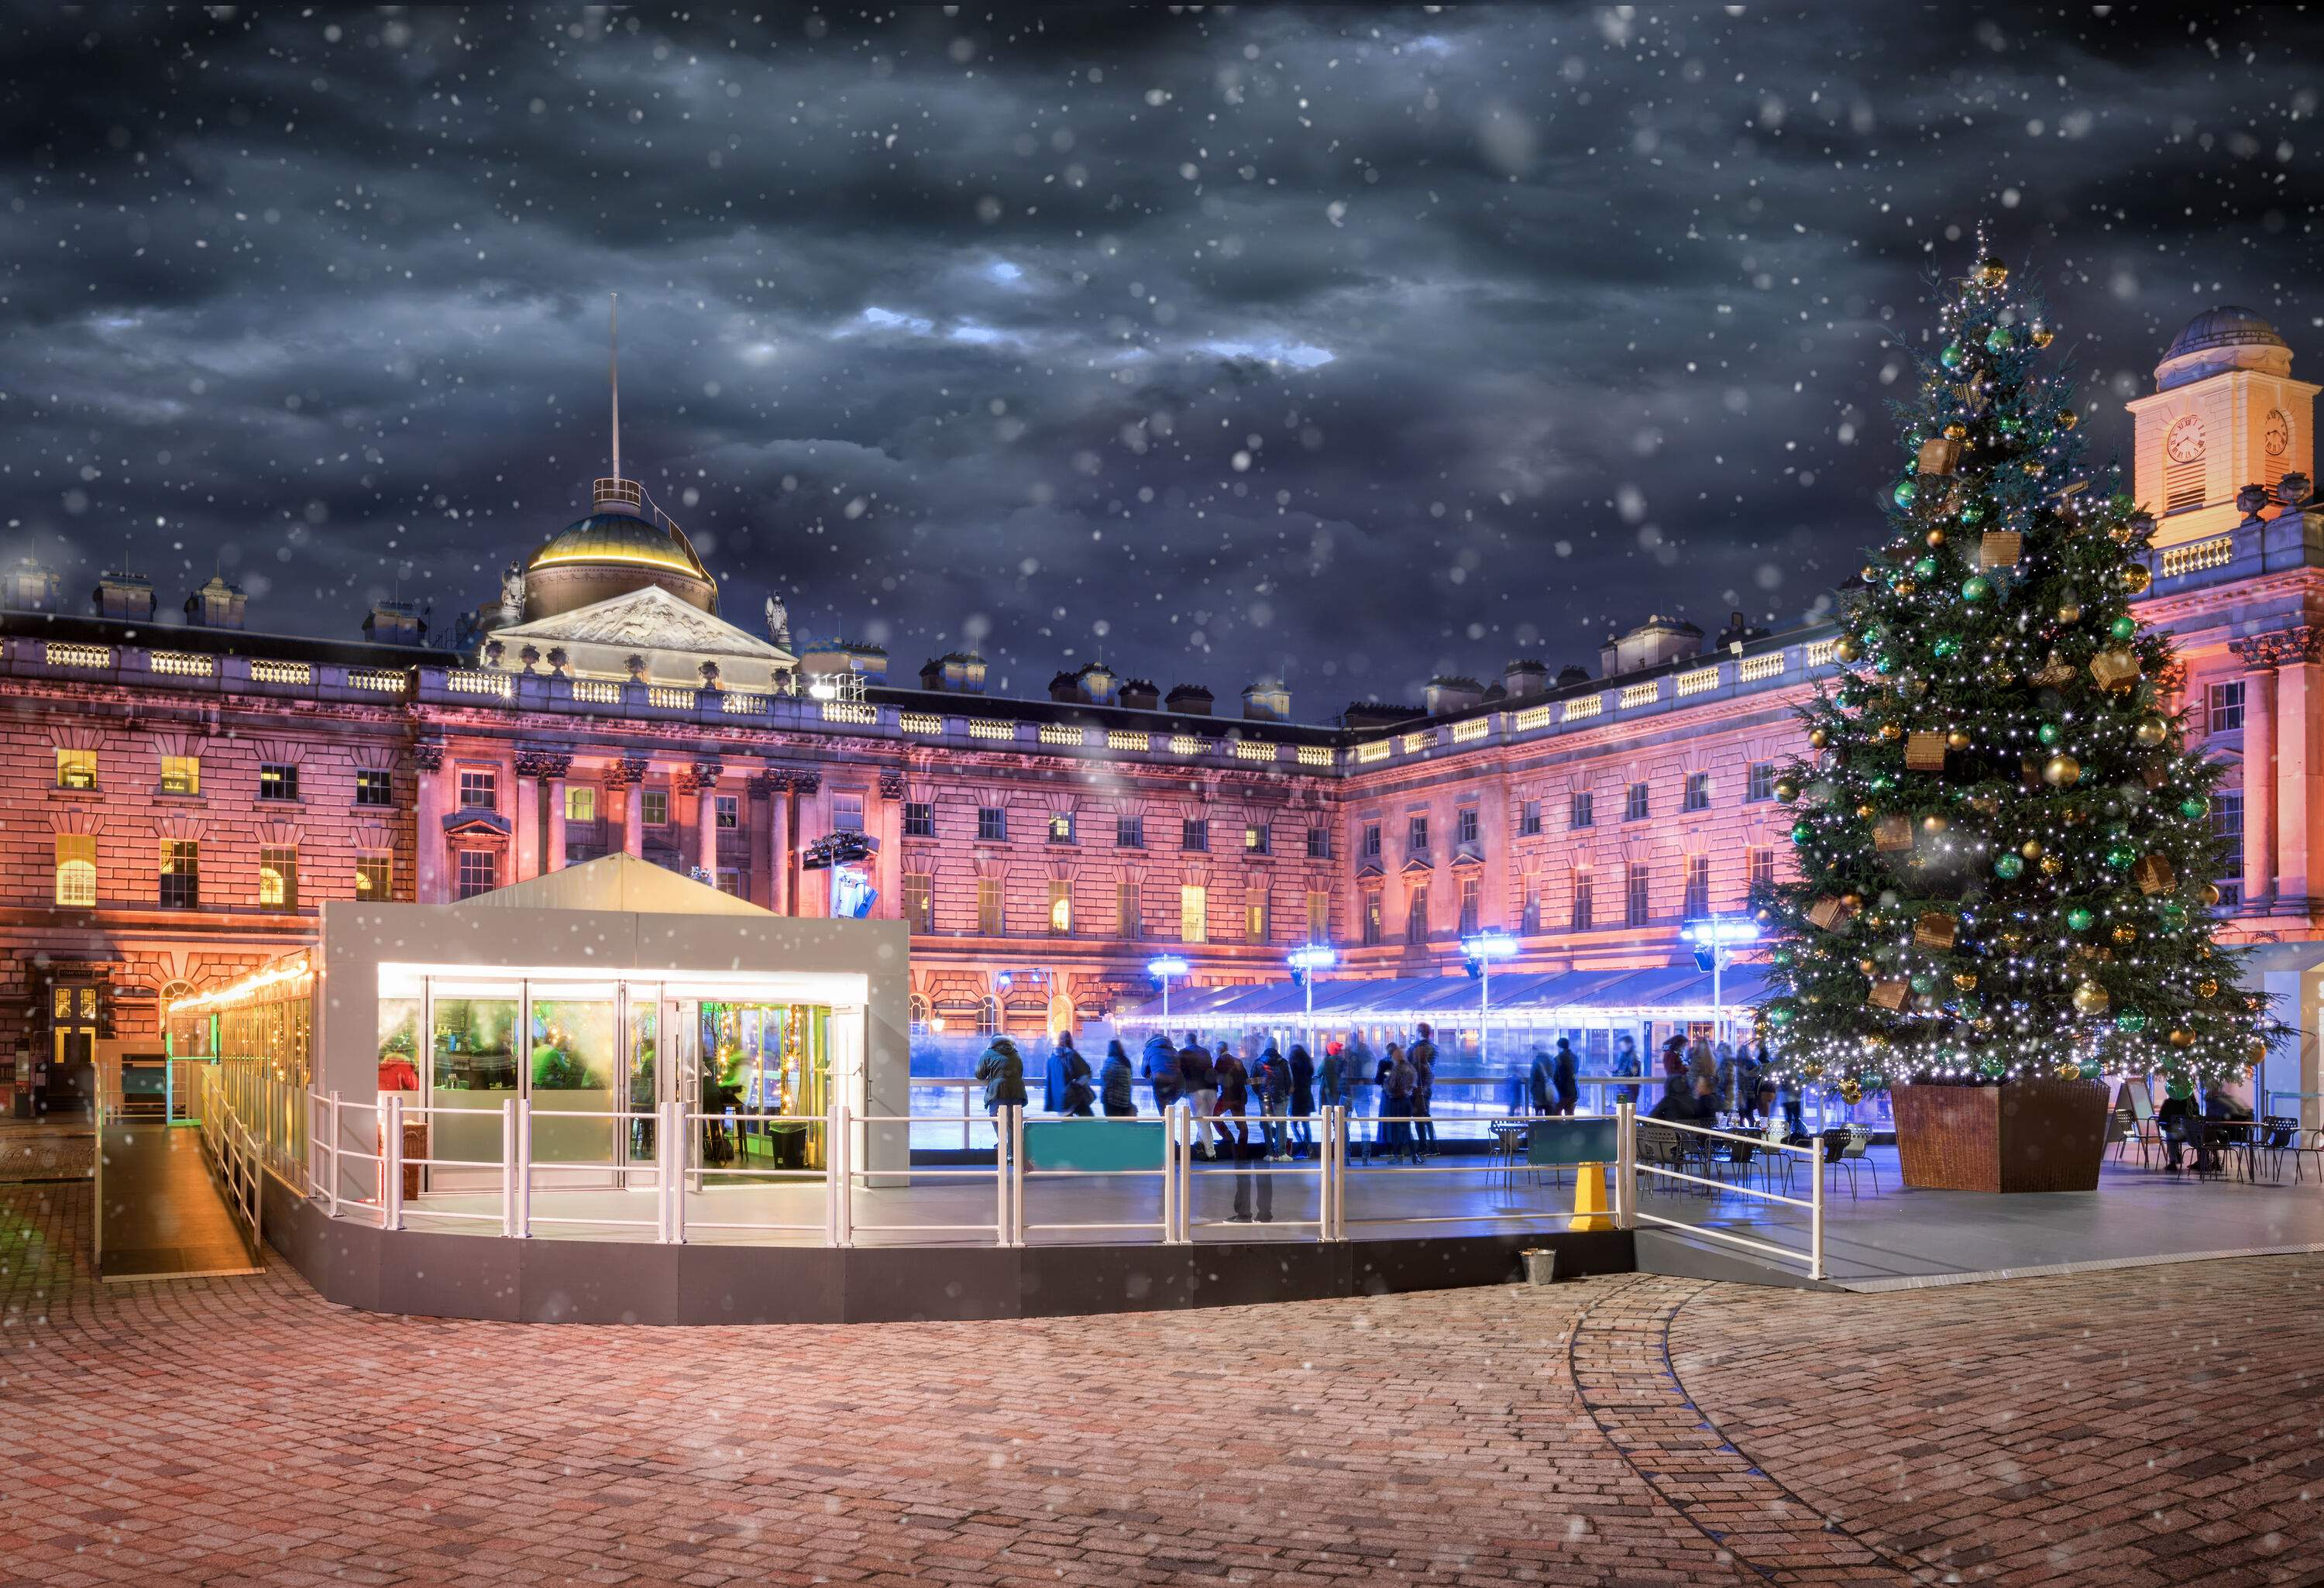 People at the ice skating rink in front of the illuminated Somerset House in London, England, decorated with a giant Christmas tree on a snowy winter night.